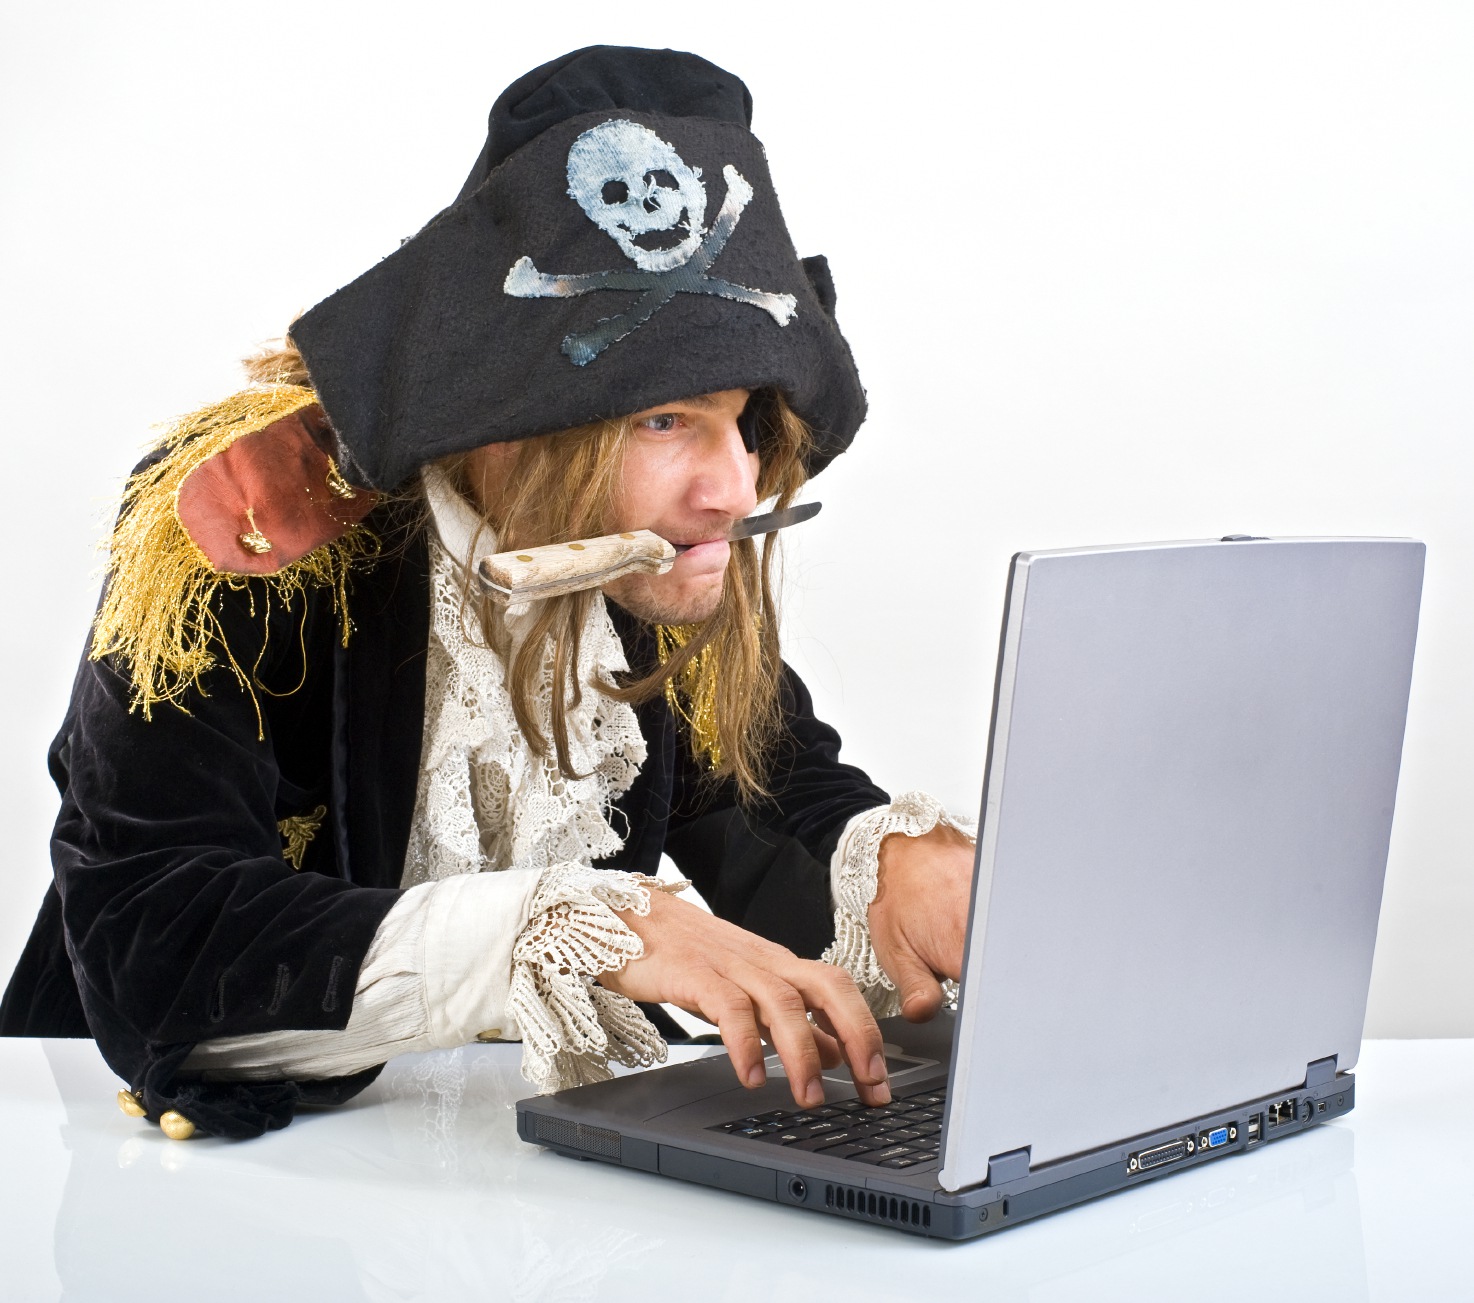 Google Pirate Just Hit Us: What It Means for Web Content